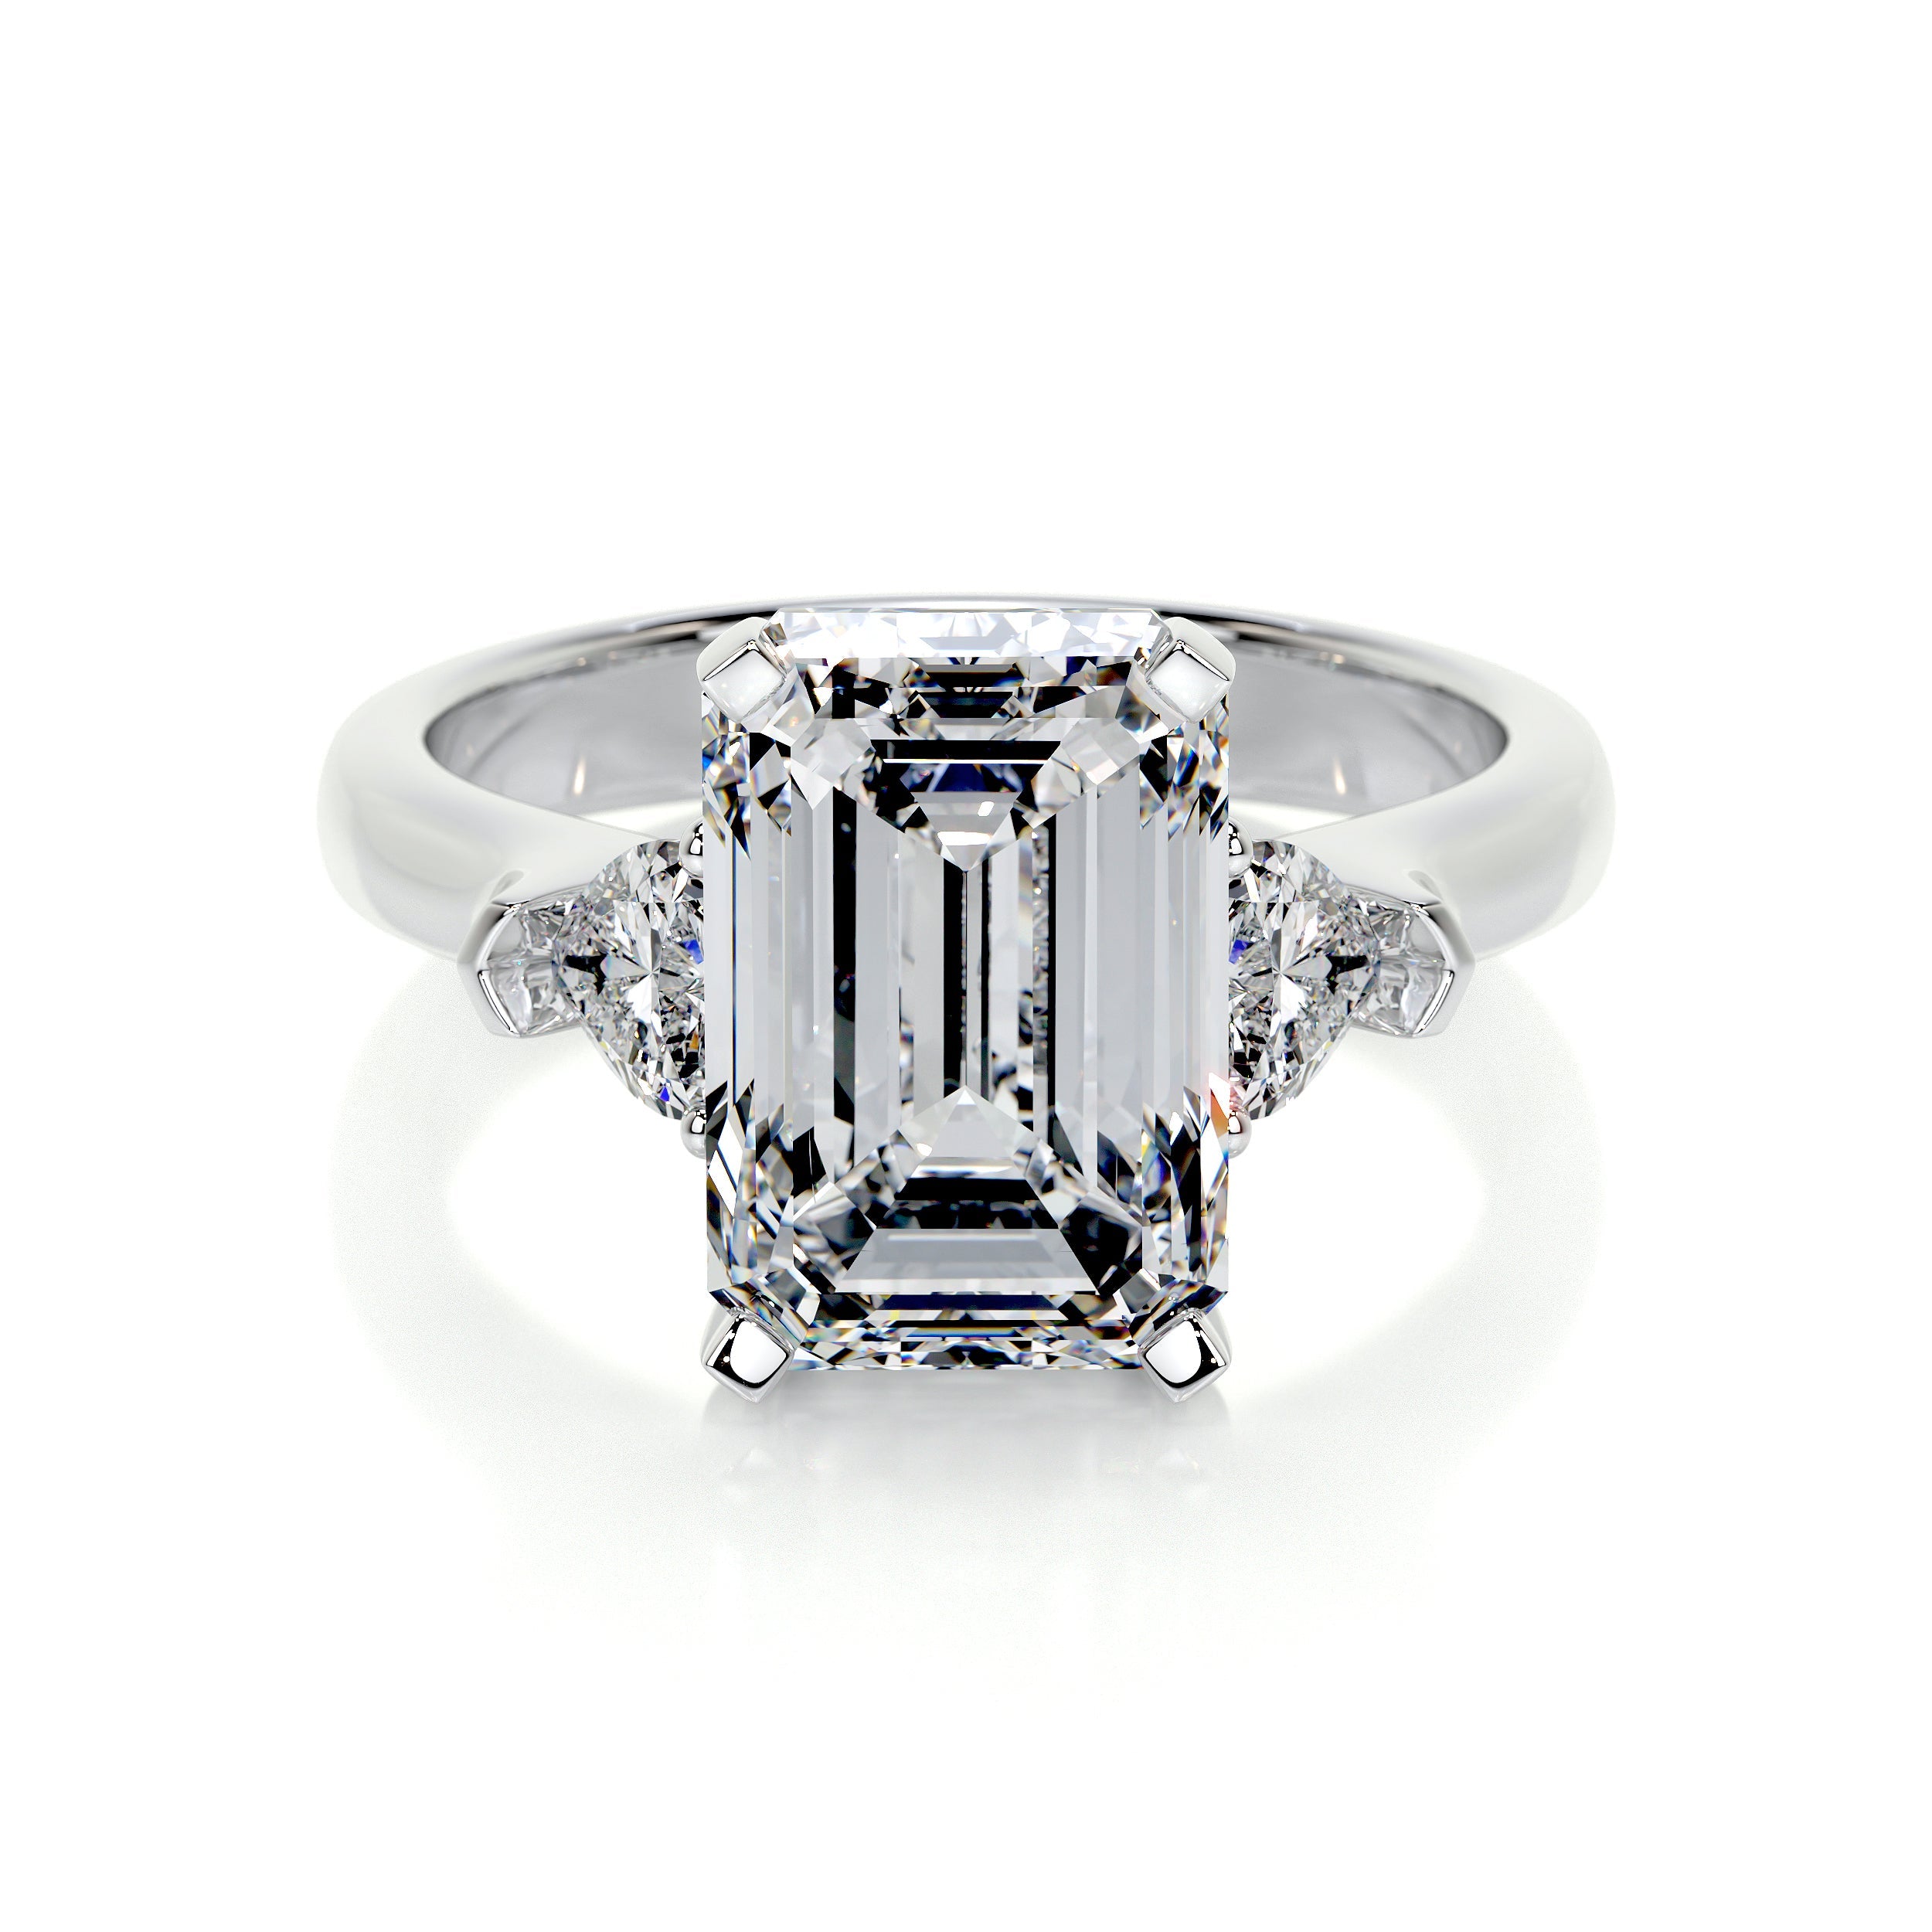 A Complete Guide to Emerald-Cut Diamond Engagement Rings - Kwiat